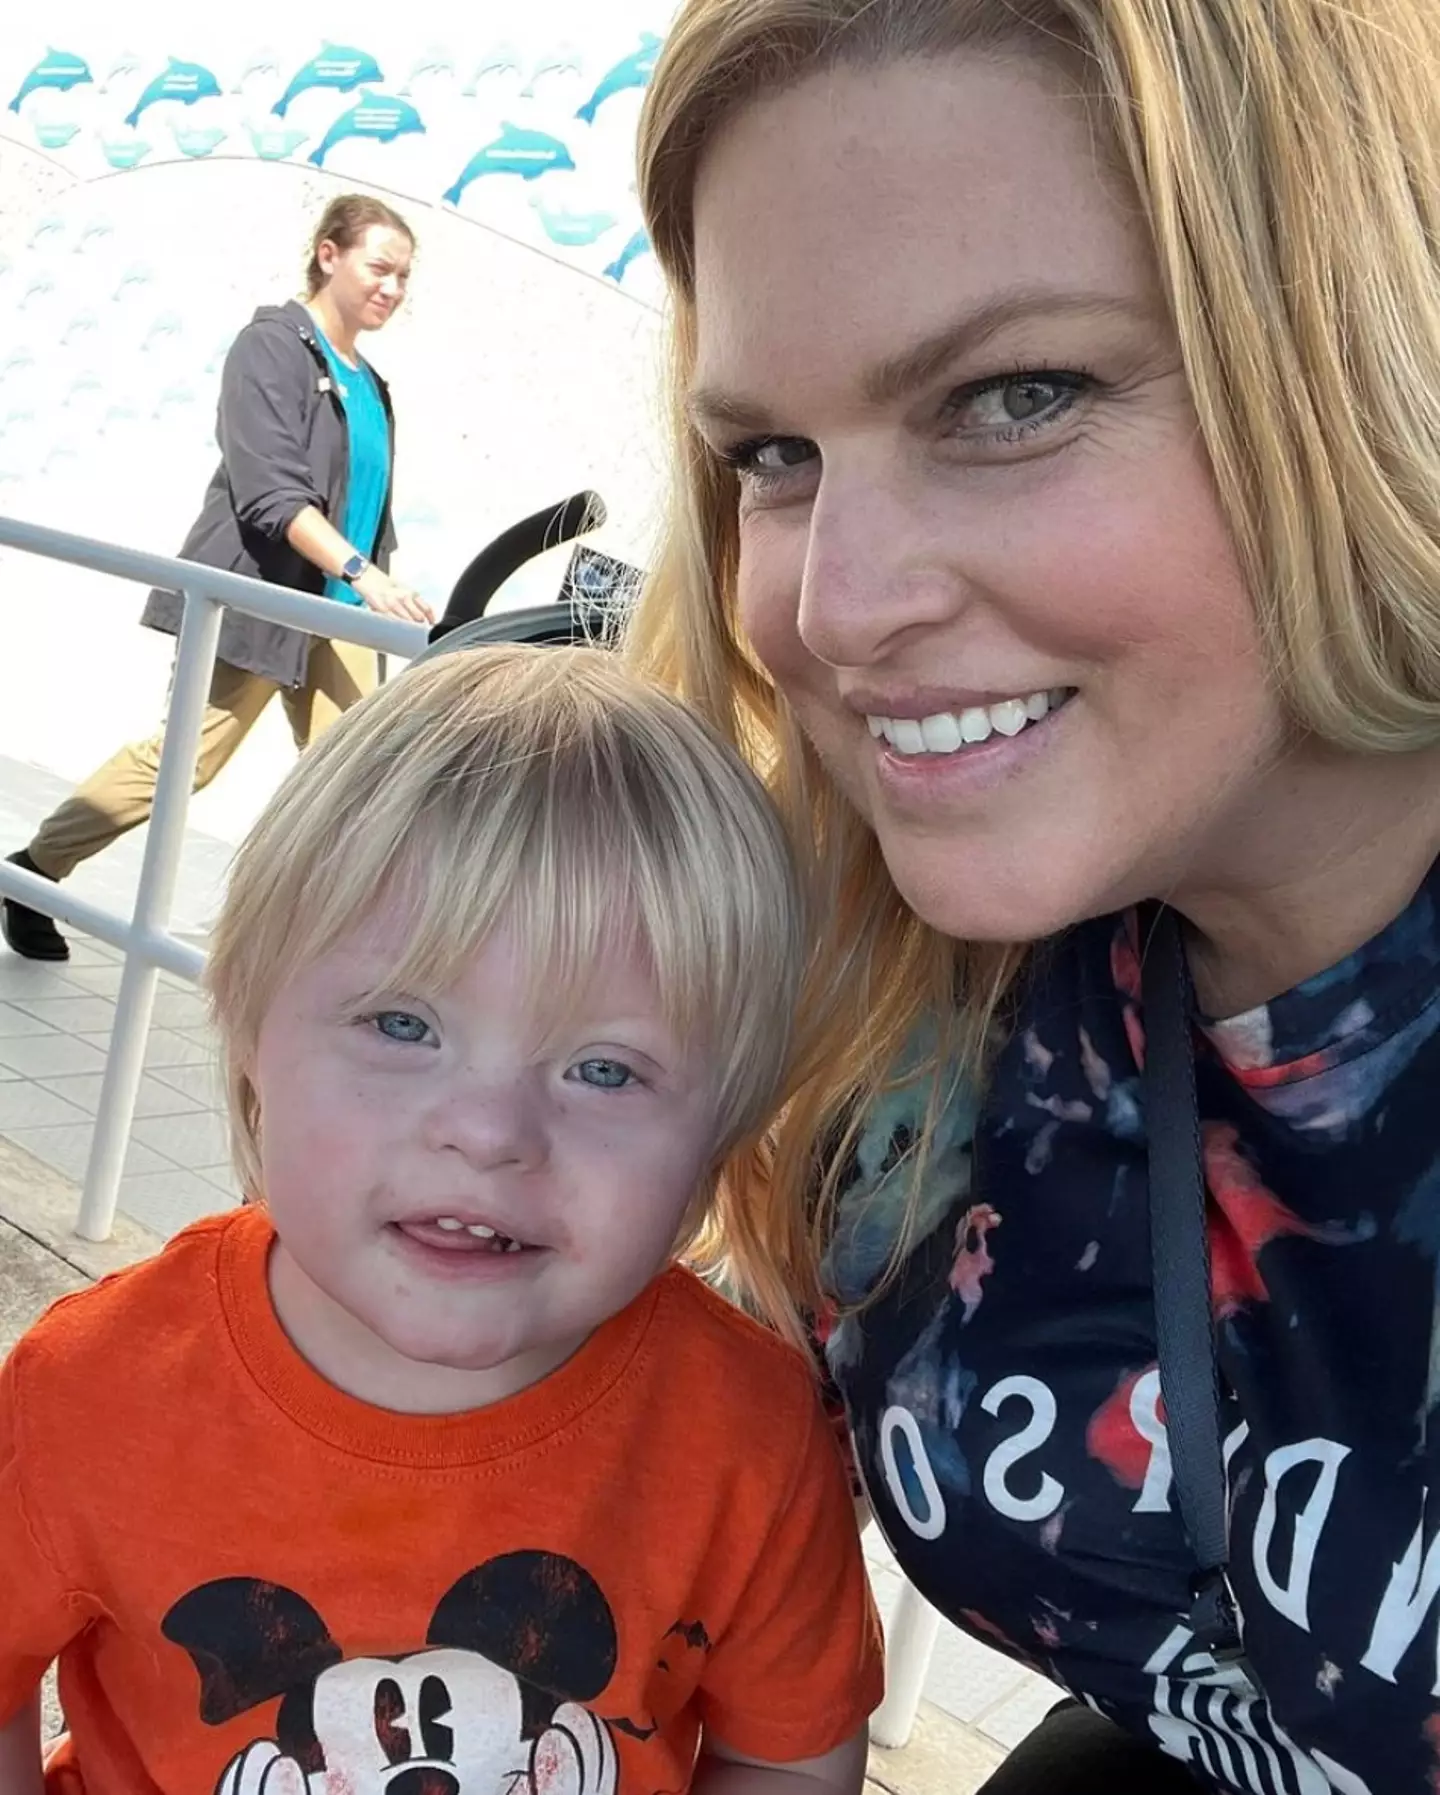 Brittany Gabrel is sharing her son's cancer symptoms to raise awareness.